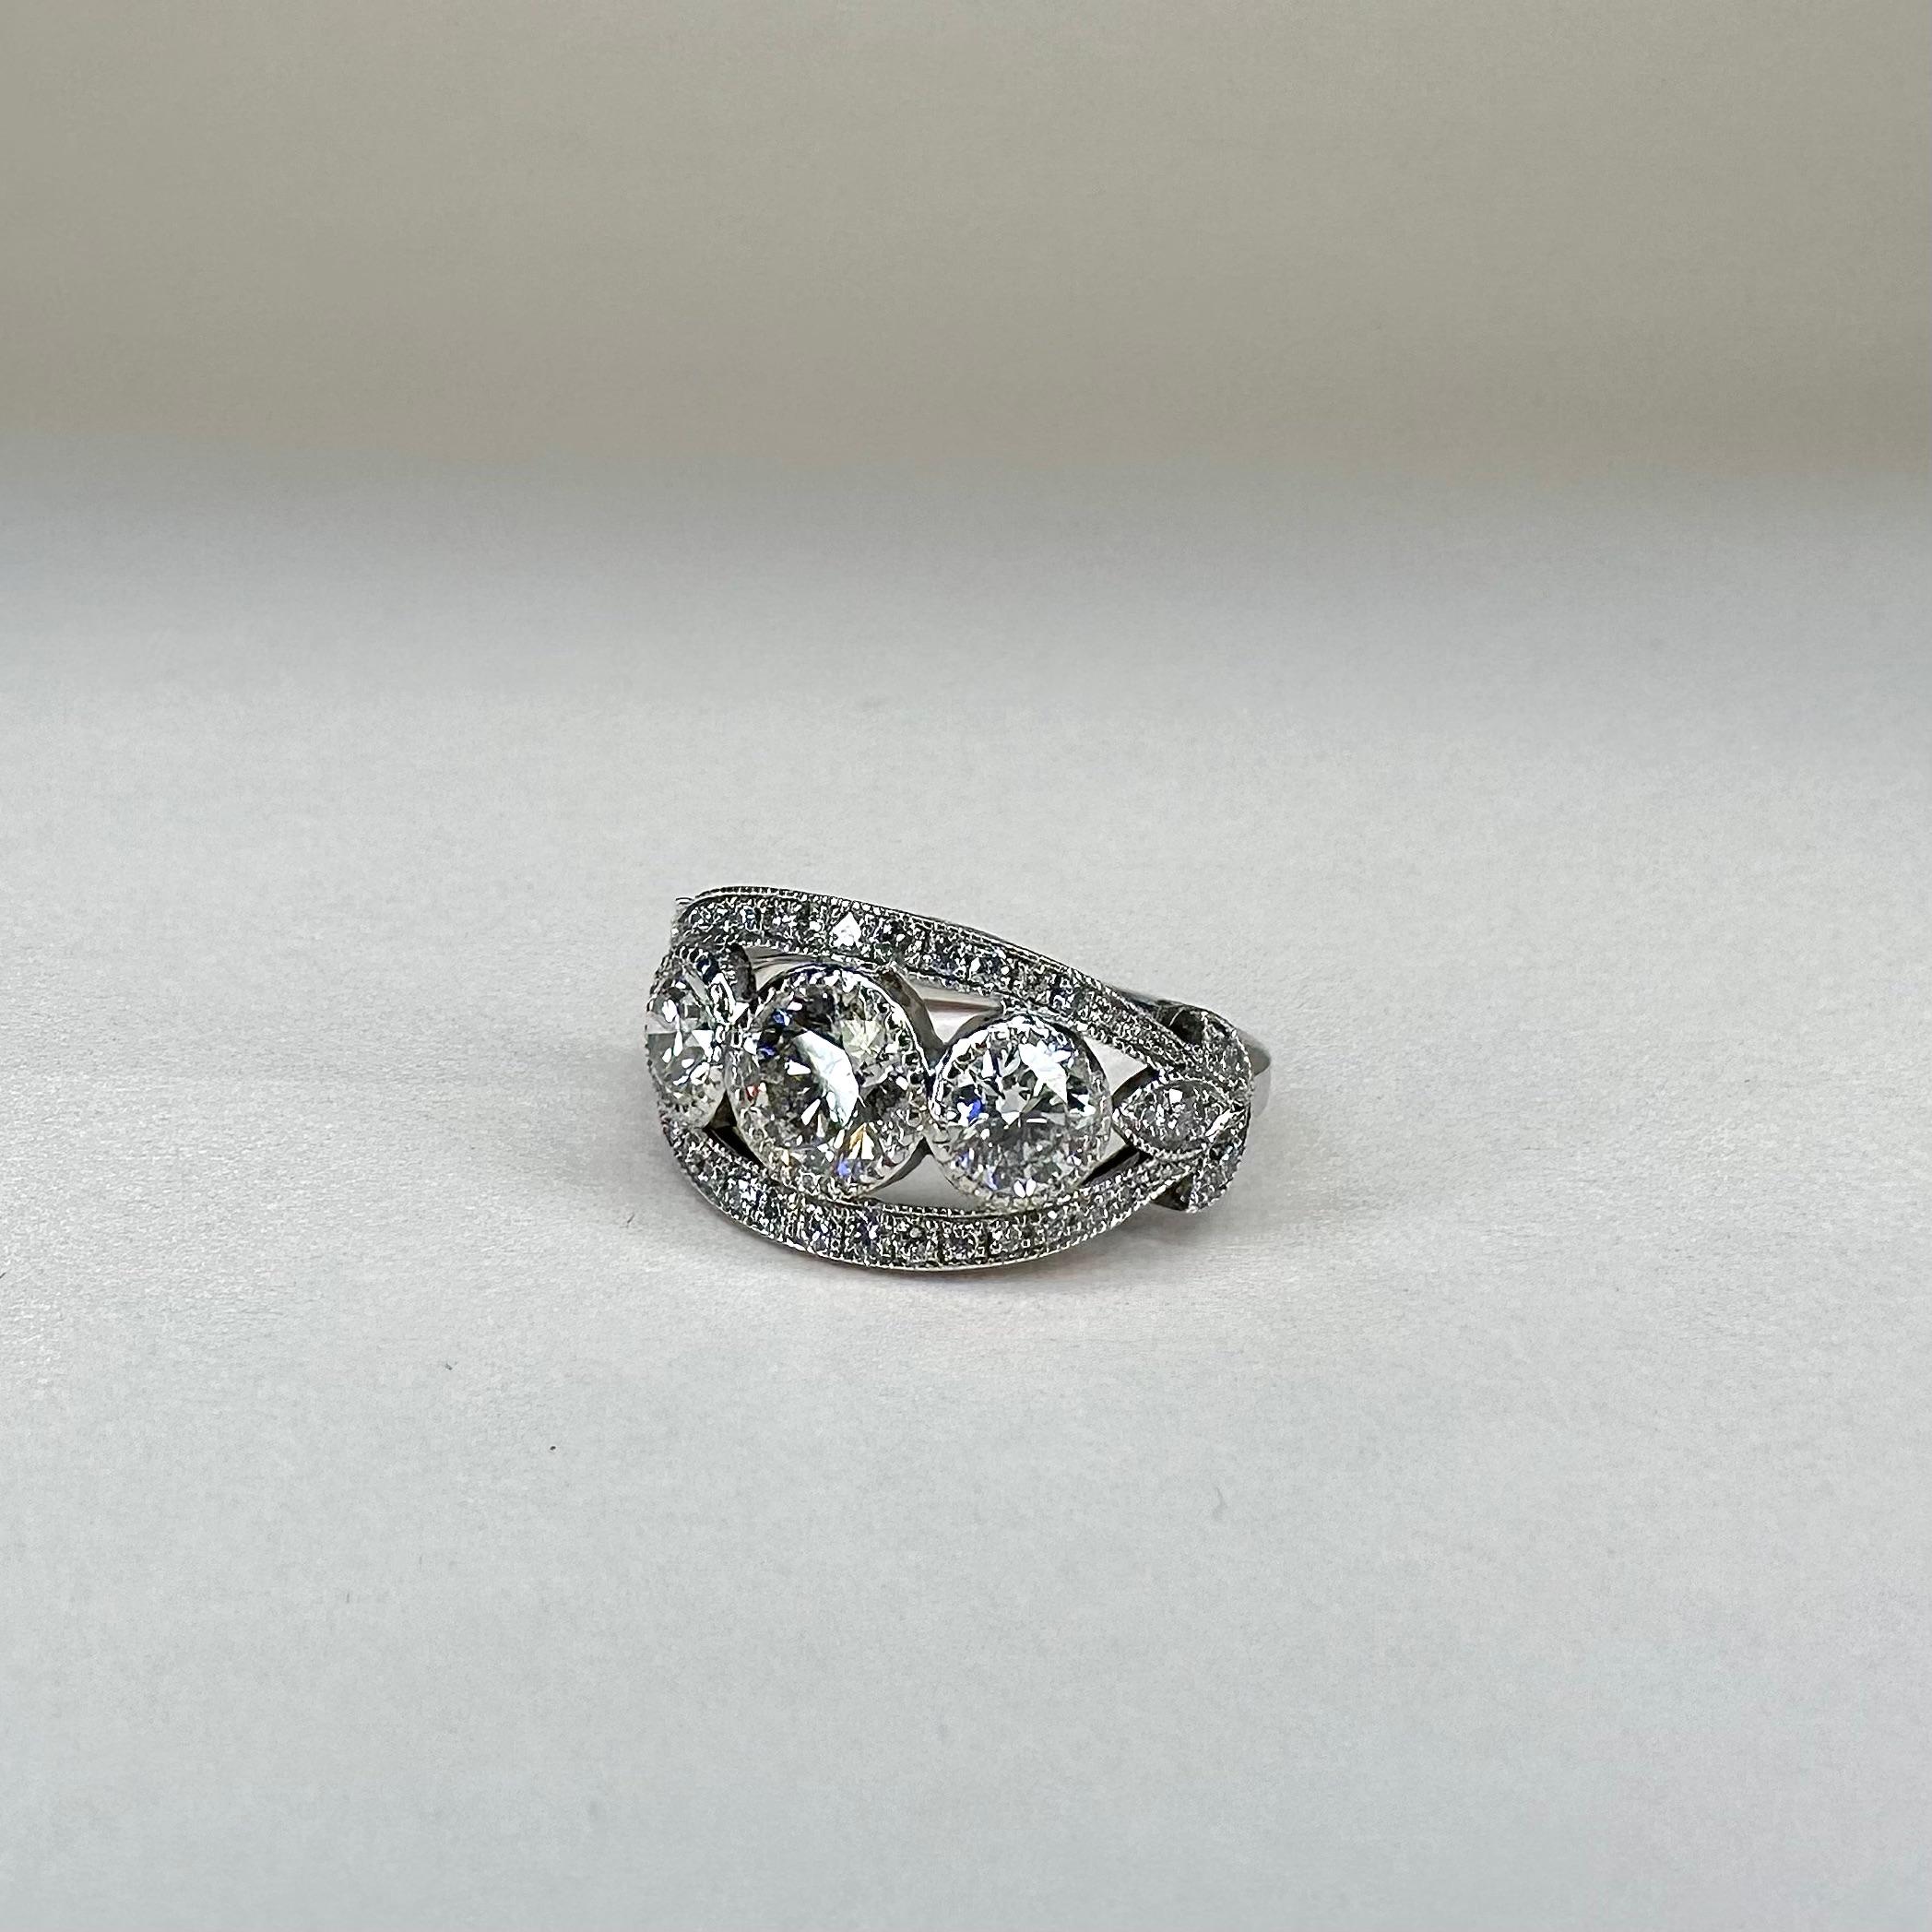 For Sale:  18k White Gold 3 Stone Diamond Ring With a 0.70 Ct And 2x 0.35 Cts Brilliant Cut 3